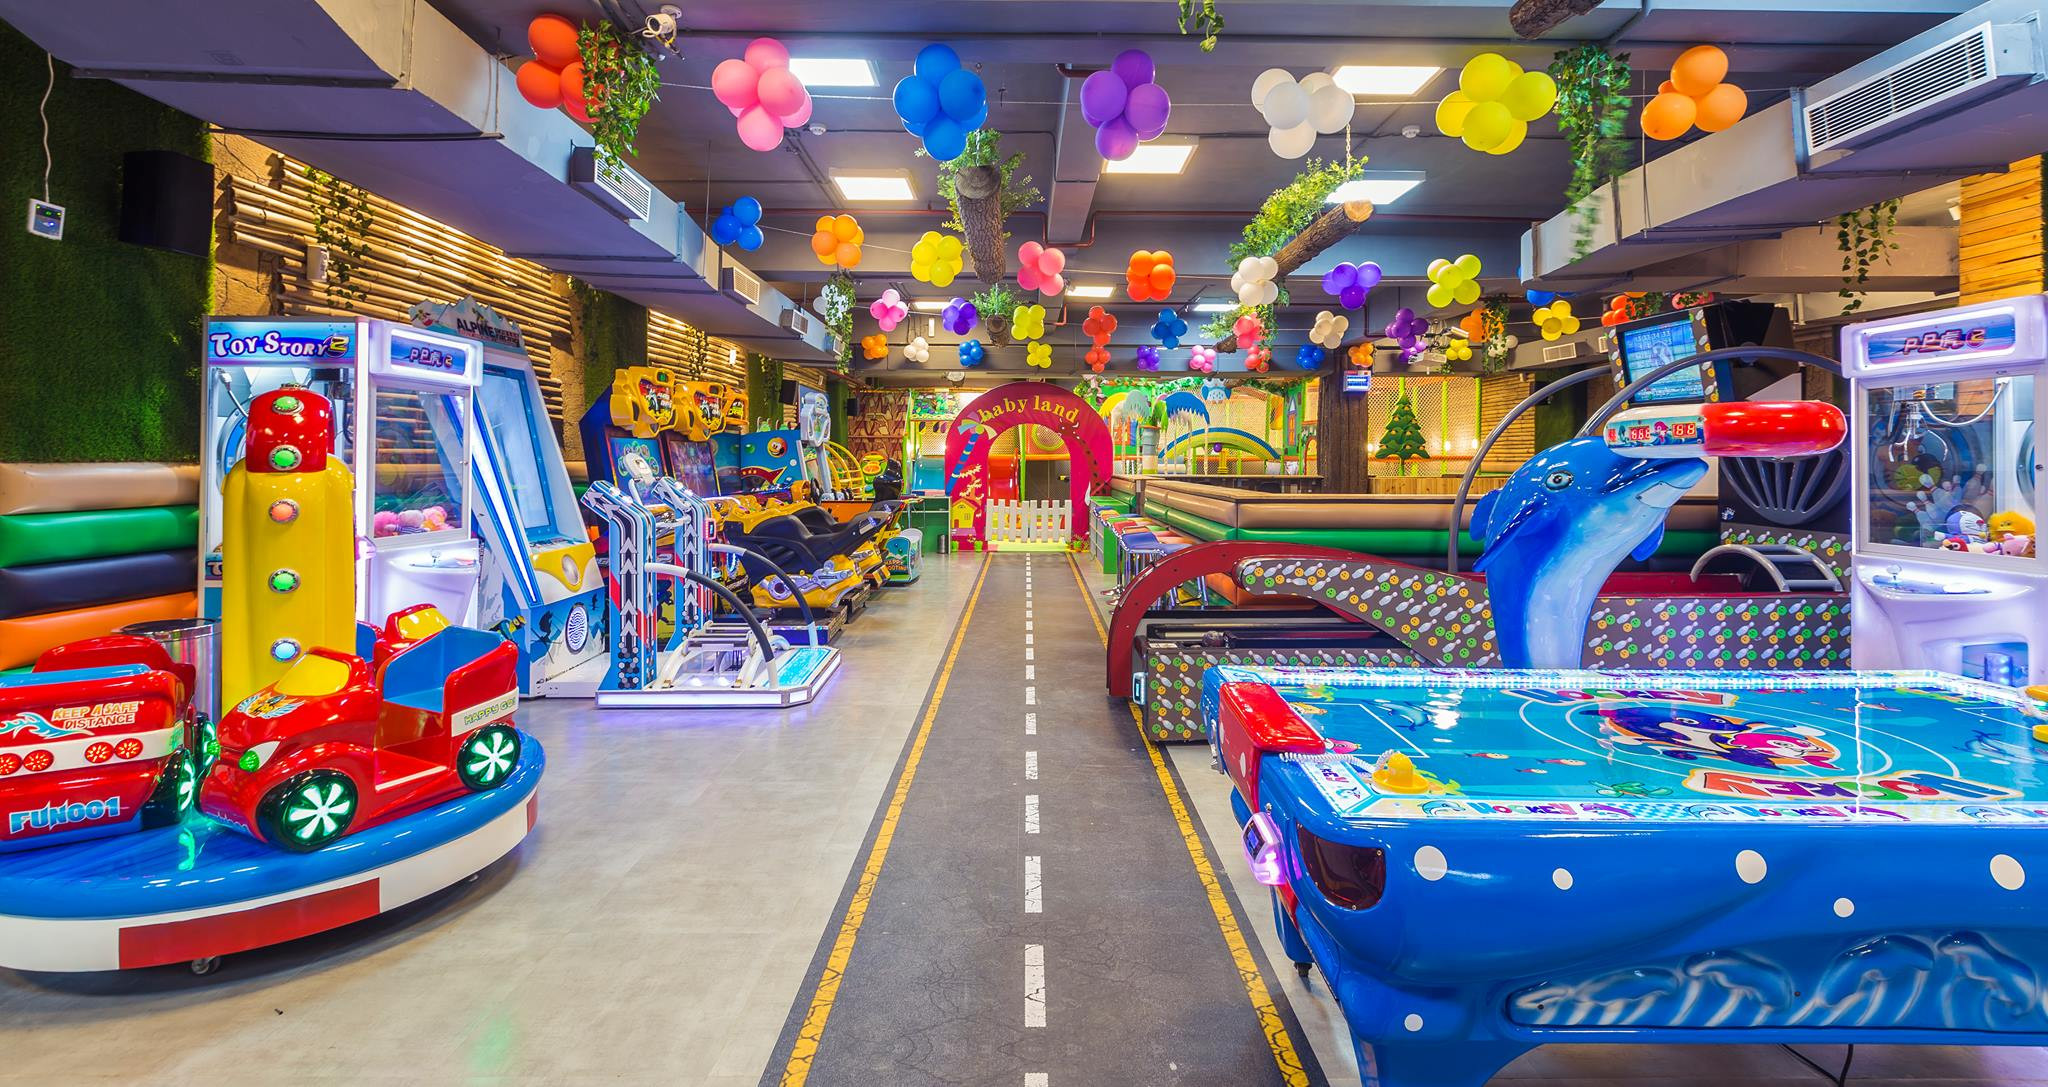 Indoor Places For Kids
 Kids Entertainment Zone for Kids Fun Indoor Places for